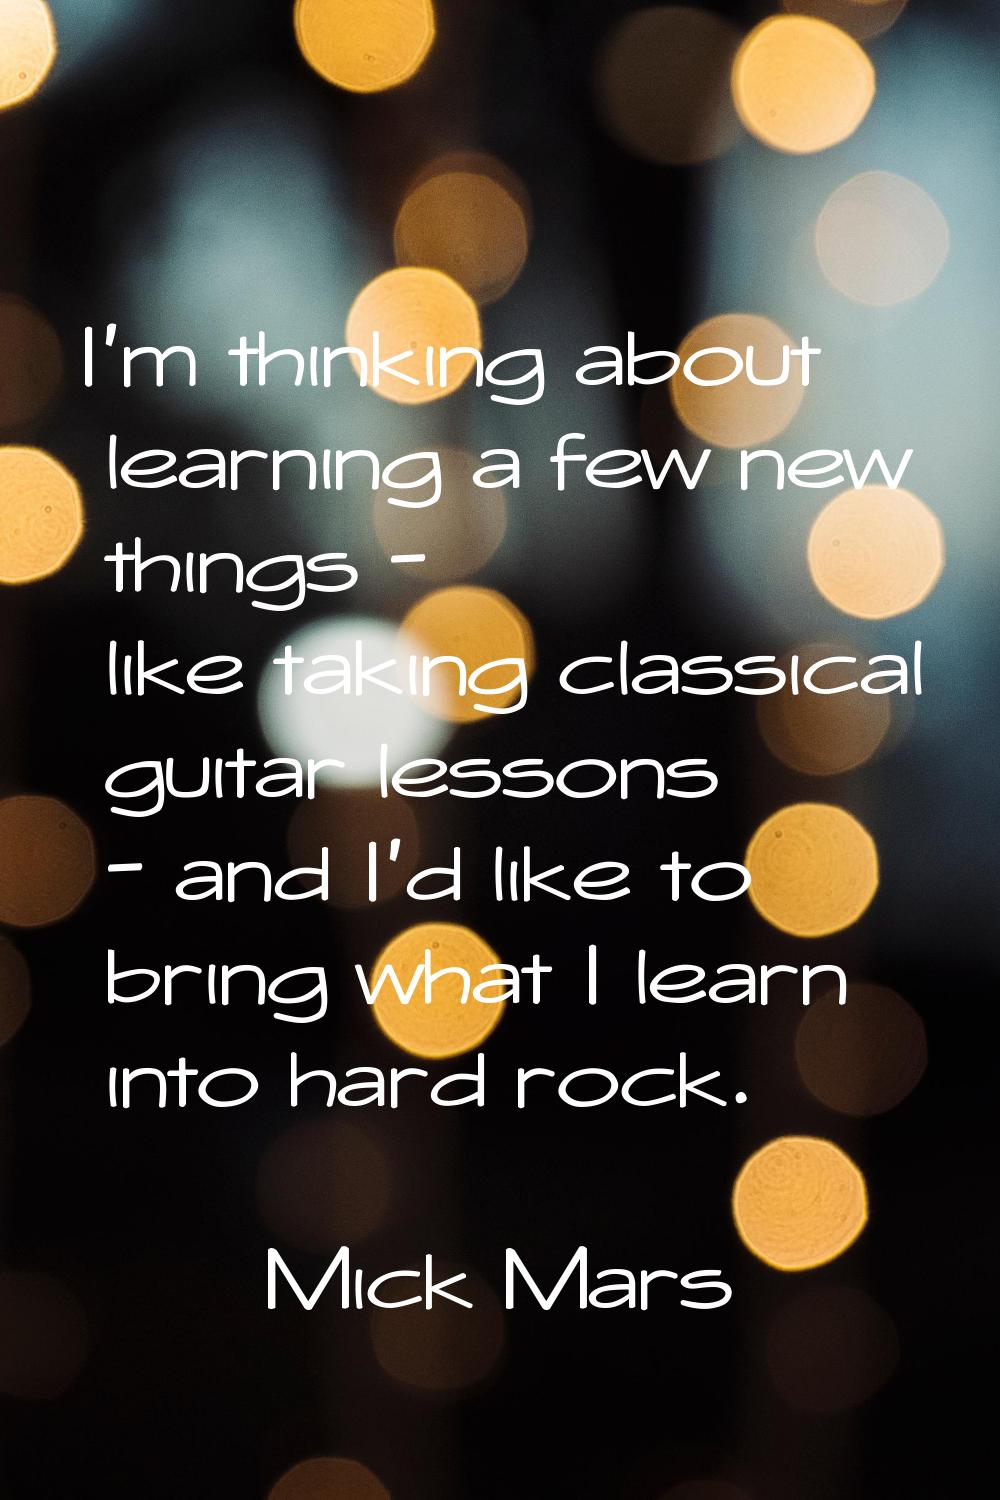 I'm thinking about learning a few new things - like taking classical guitar lessons - and I'd like 